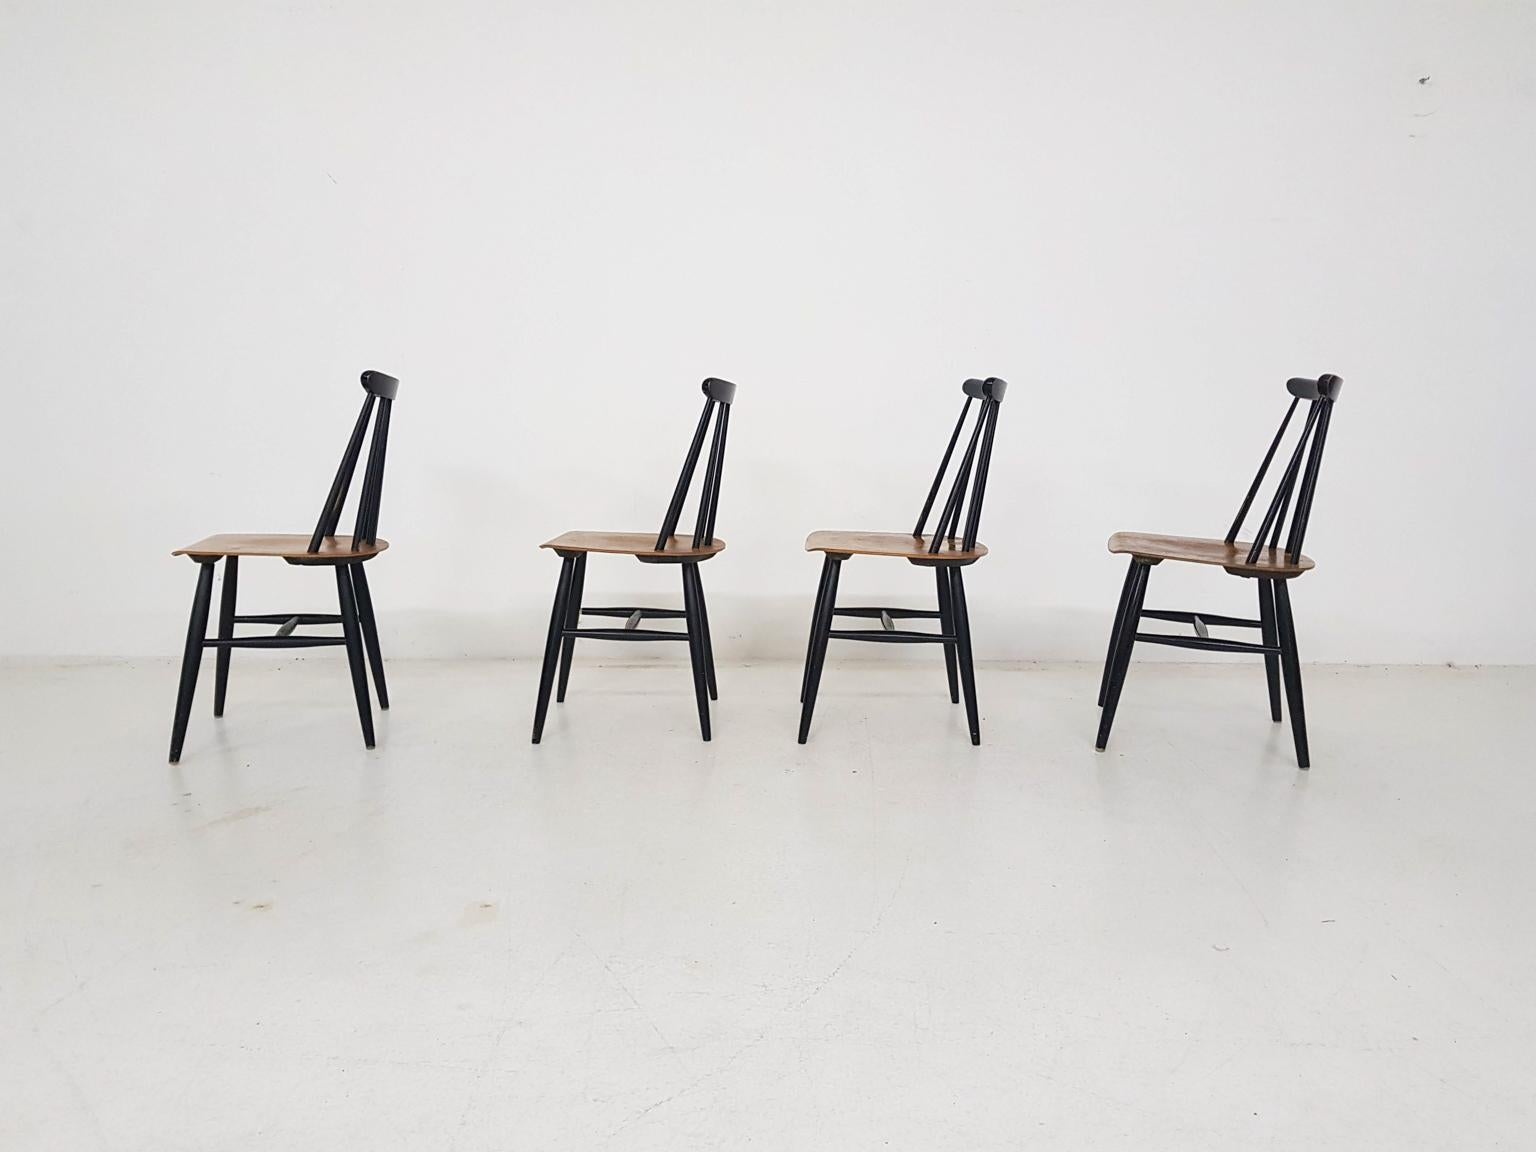 A set of 4 original and marked Scandinavian Modern “Fanett” dining chairs by Finnish designer Ilmari Tapiovaara for Edsby-verken, Sweden, 1961.

These chairs are early editions from 1961. Marked Edsby-verken and Ilmari Tapiovaara underneath the